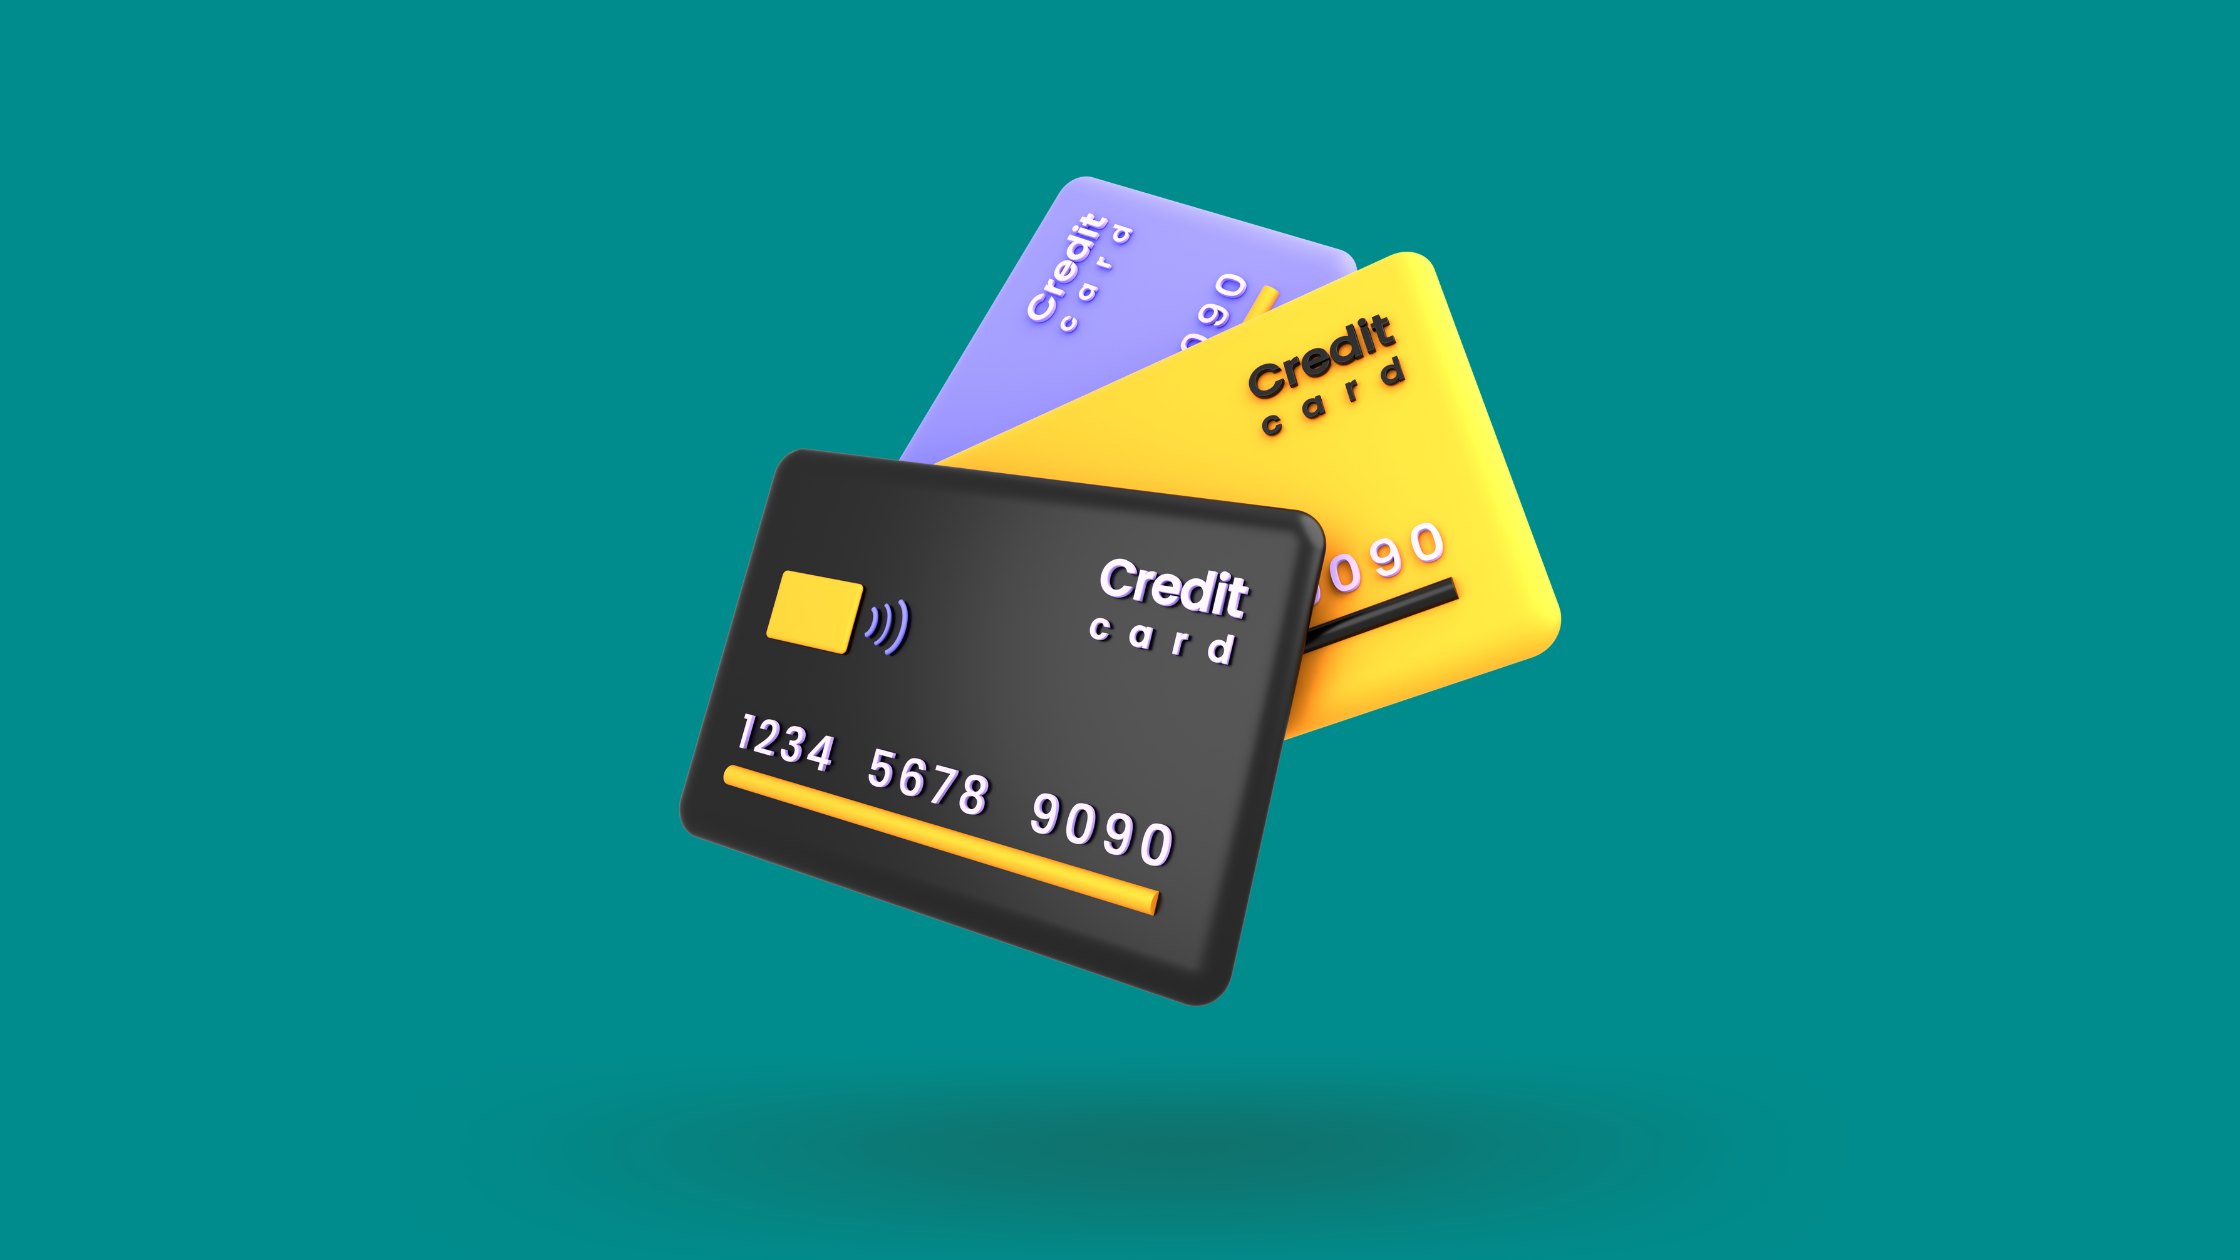 banks credit card cryptocurrency